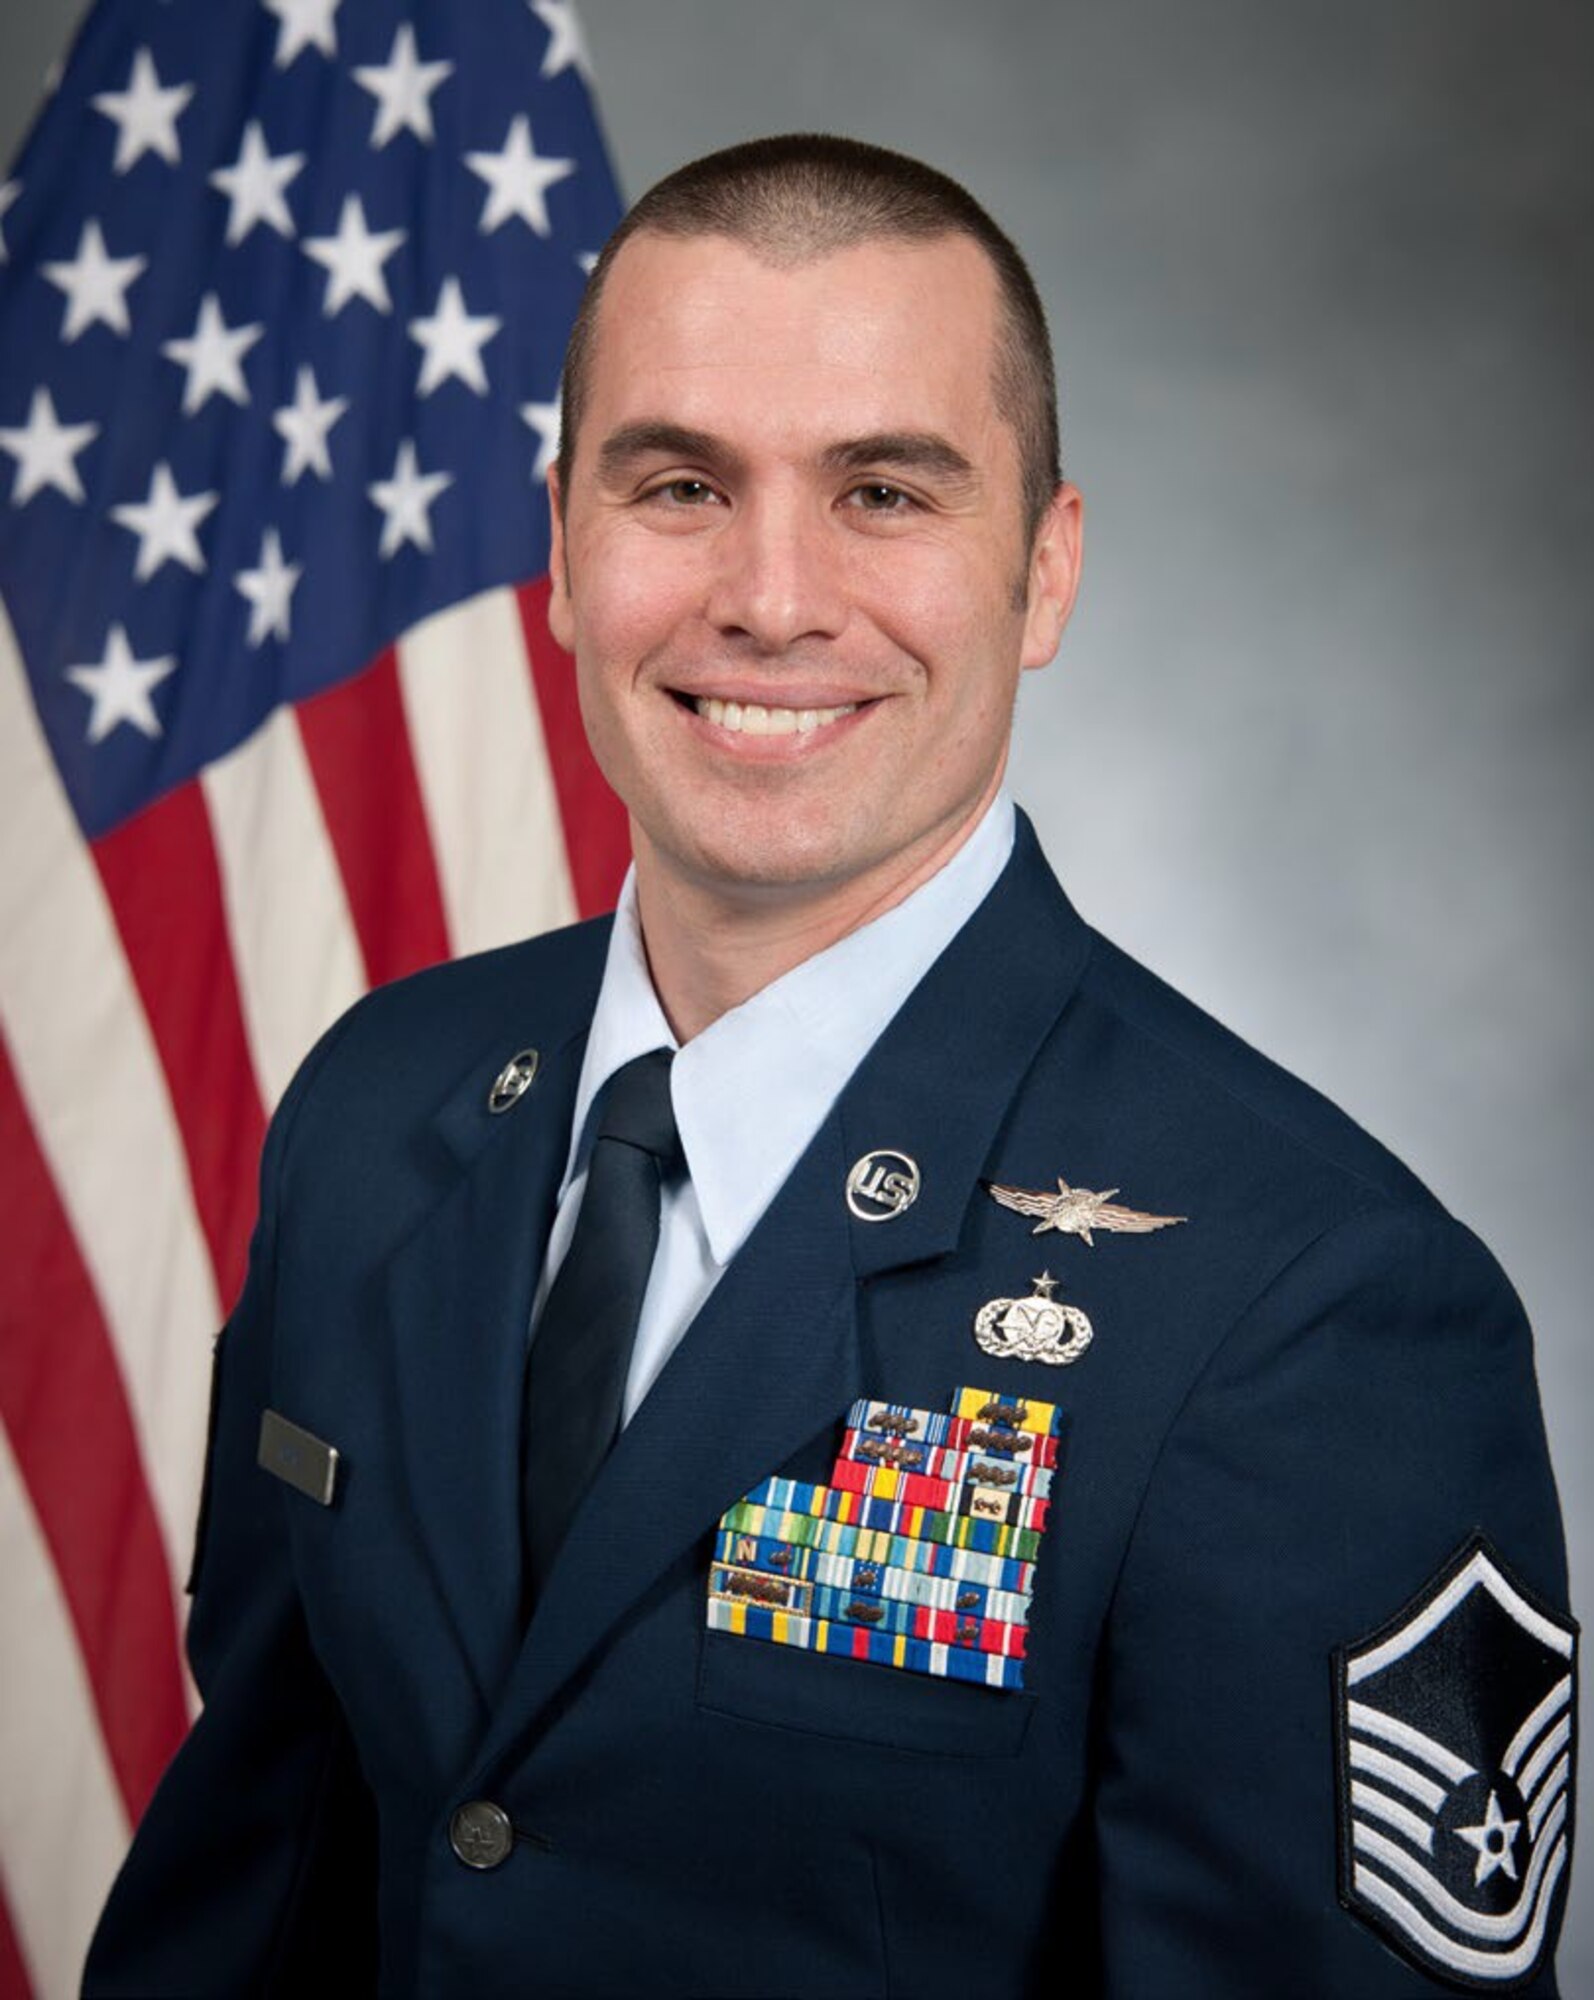 Master Sgt. Michelangelo Serio, 689th Network Operations Squadron defensive cyber operations section chief, has an official photograph taken at Maxwell-Gunter Air Force Base, Alabama, May 11, 2019. (U.S. Air Force courtesy photo)